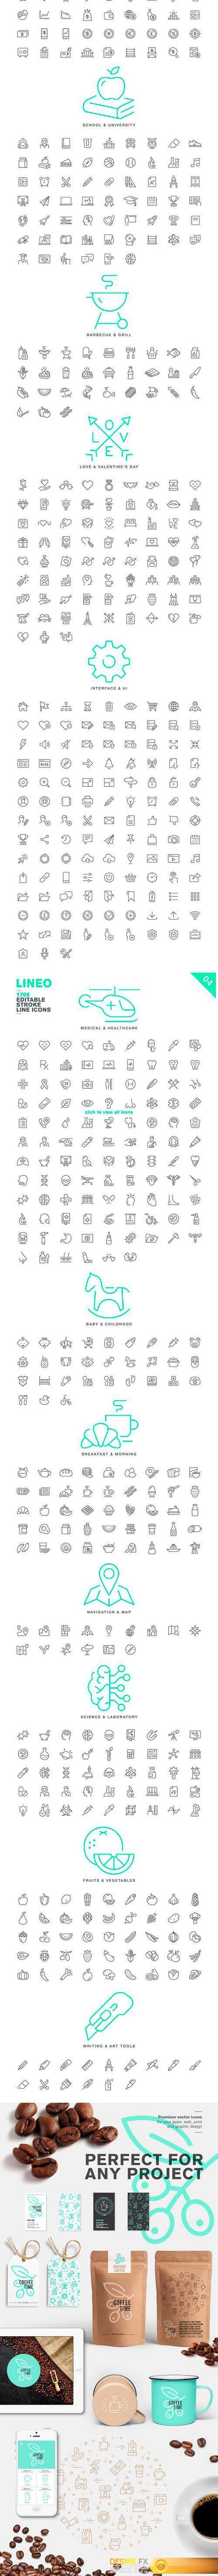 CM - LINEO - 1700+ fully editable icons 2517764